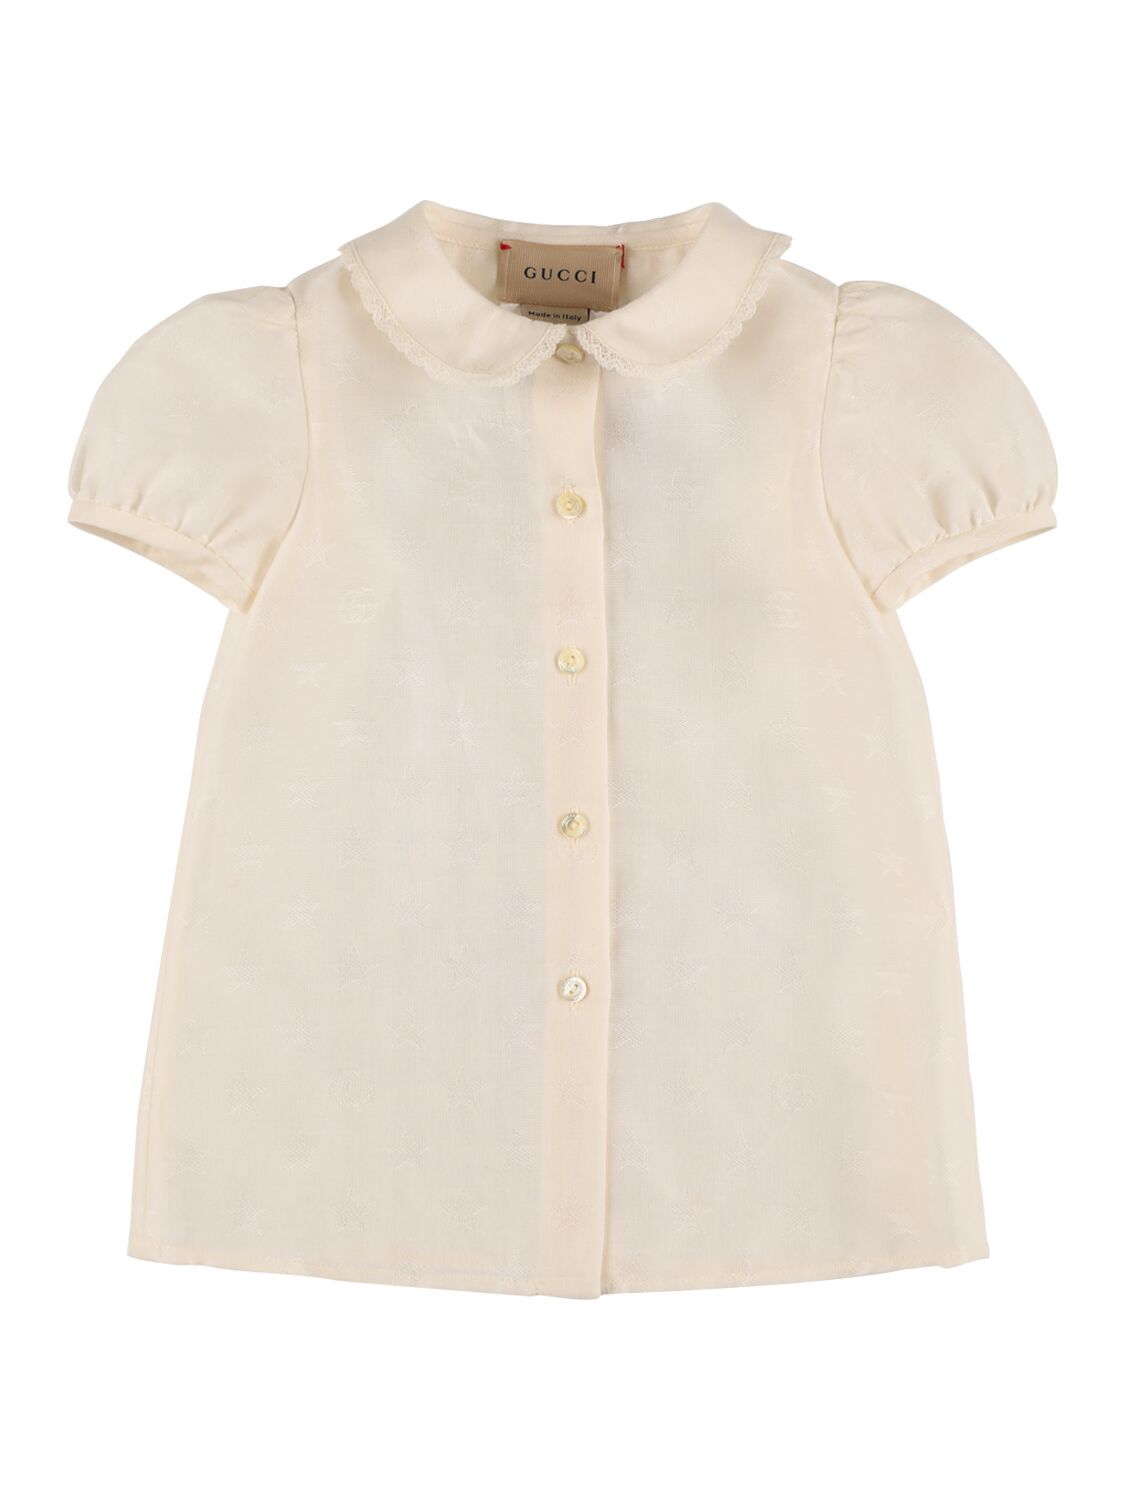 Gucci Kids' Gg Cotton Polo Shirt In Ivory